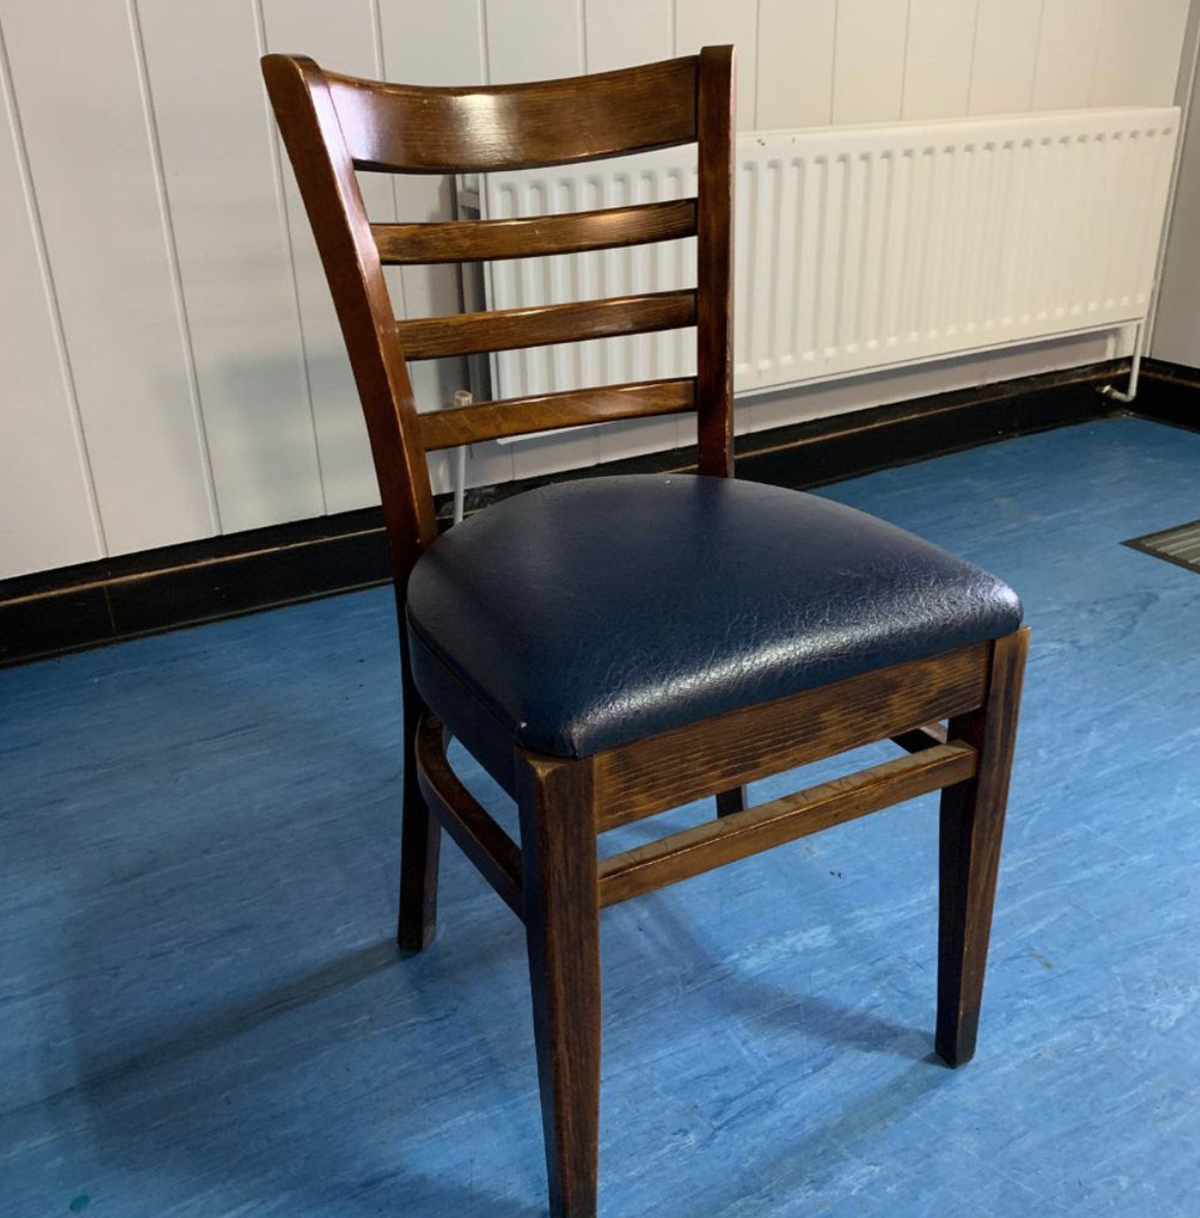 Secondhand Chairs and Tables | Restaurant Chairs | 30x Chairs - Hull